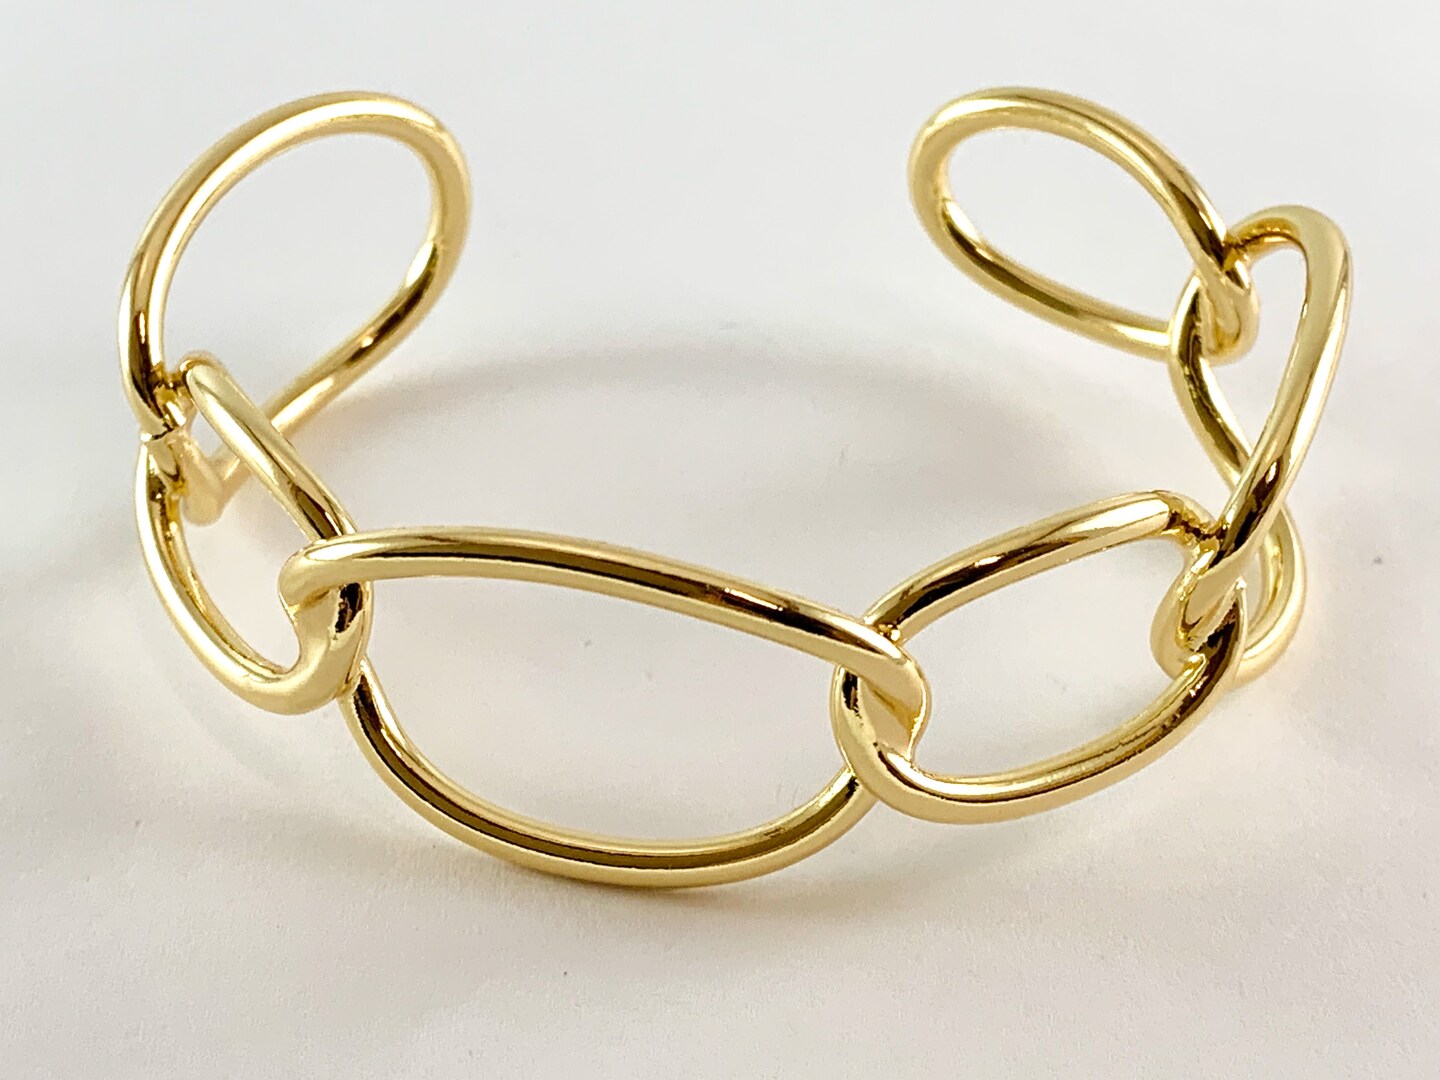 Real Gold 18K Plated Copper Chunky Oval Linked Adjustable Bracelet Cuffs 1 pc